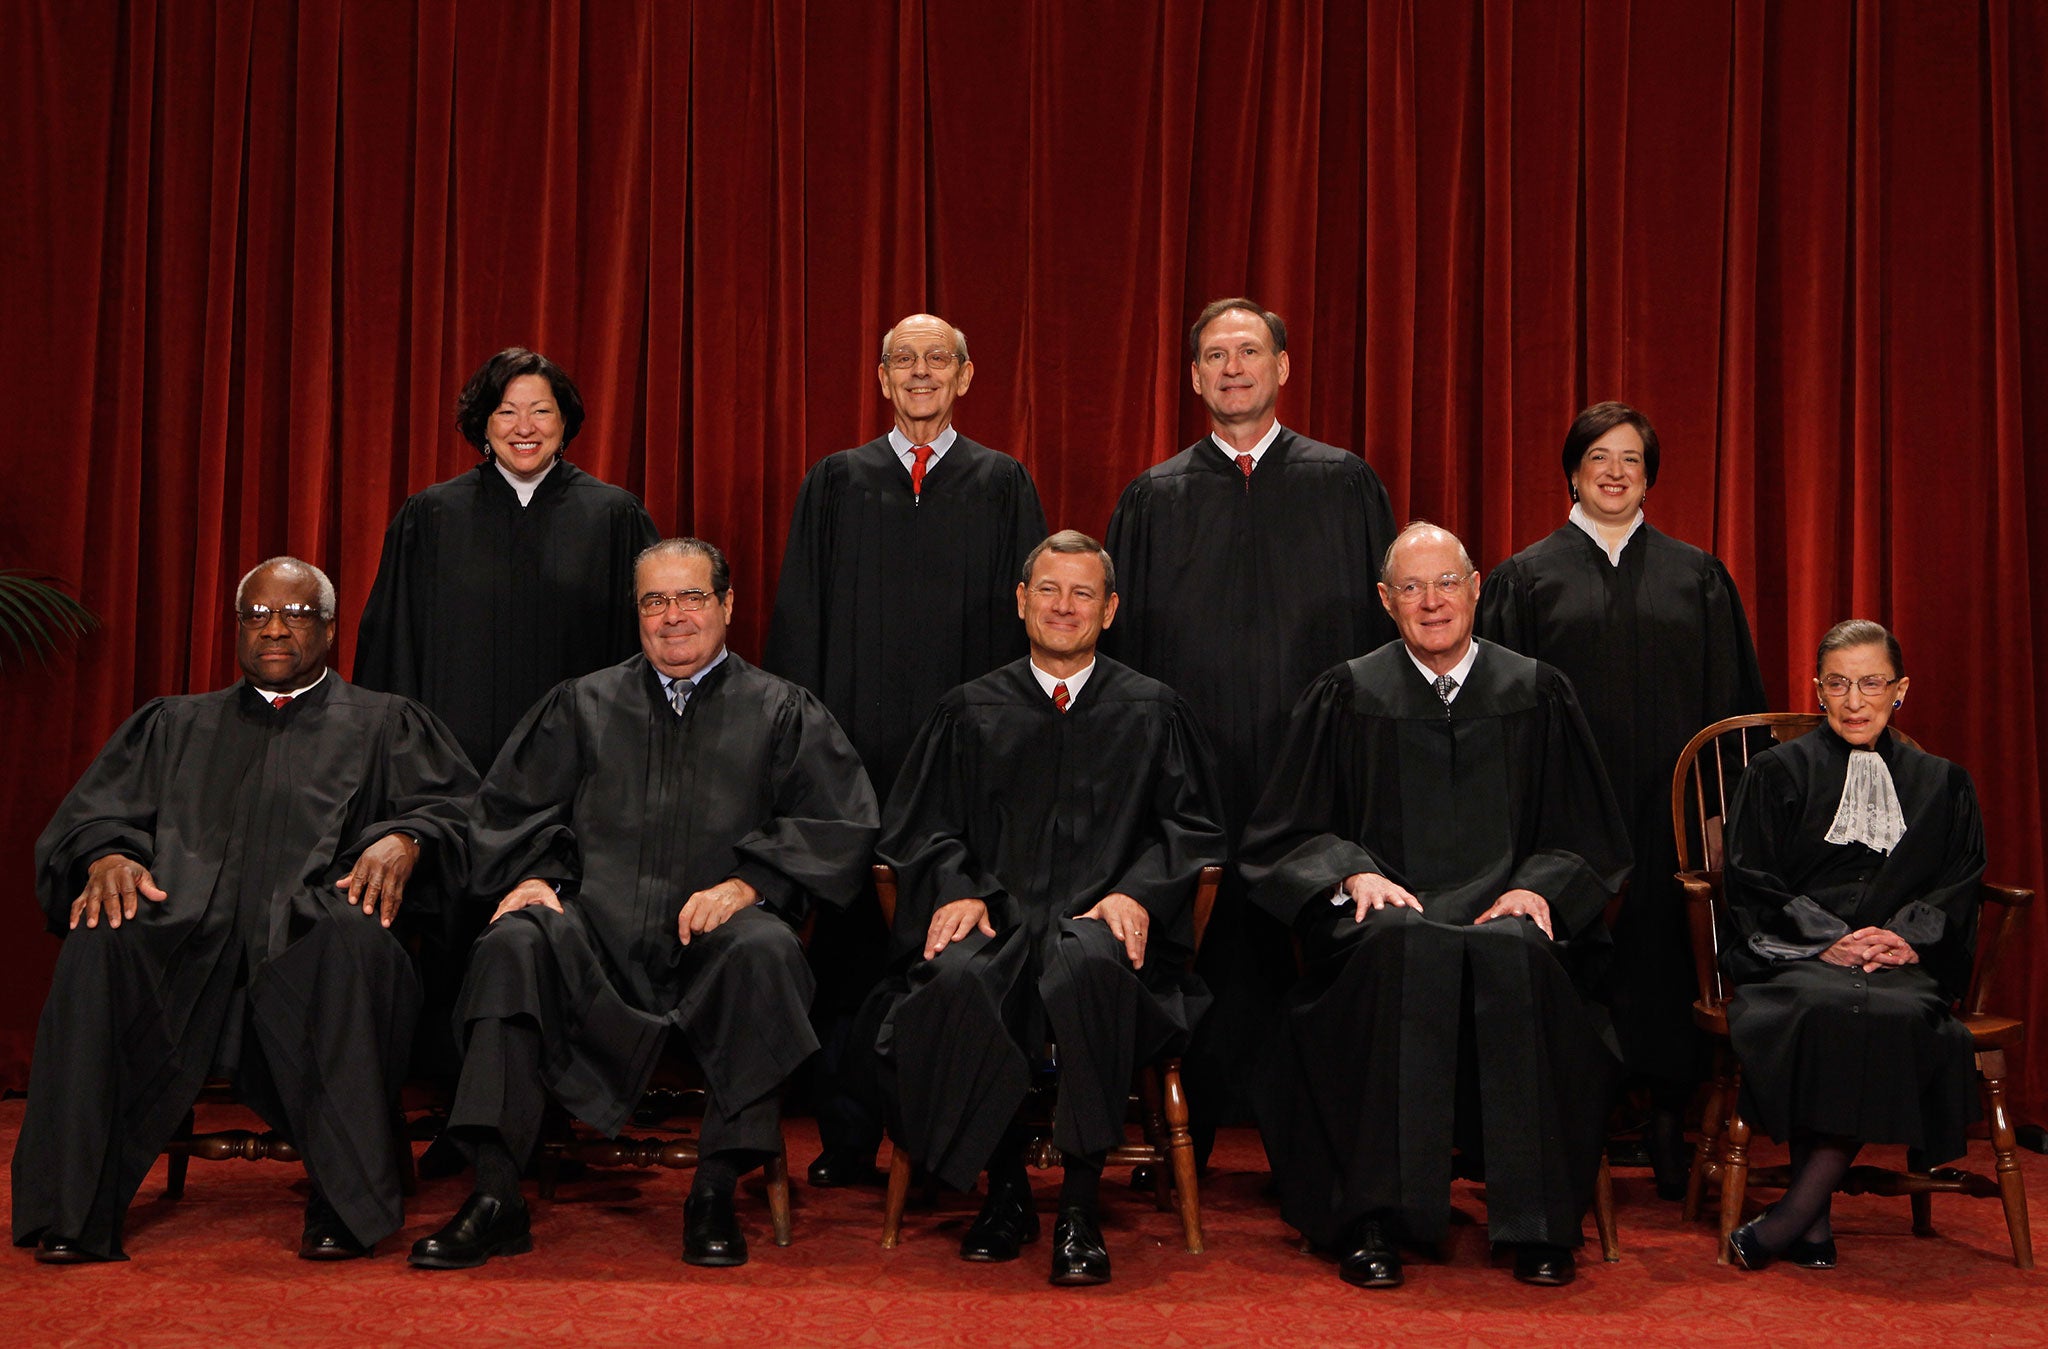 The nine US Supreme Court justices